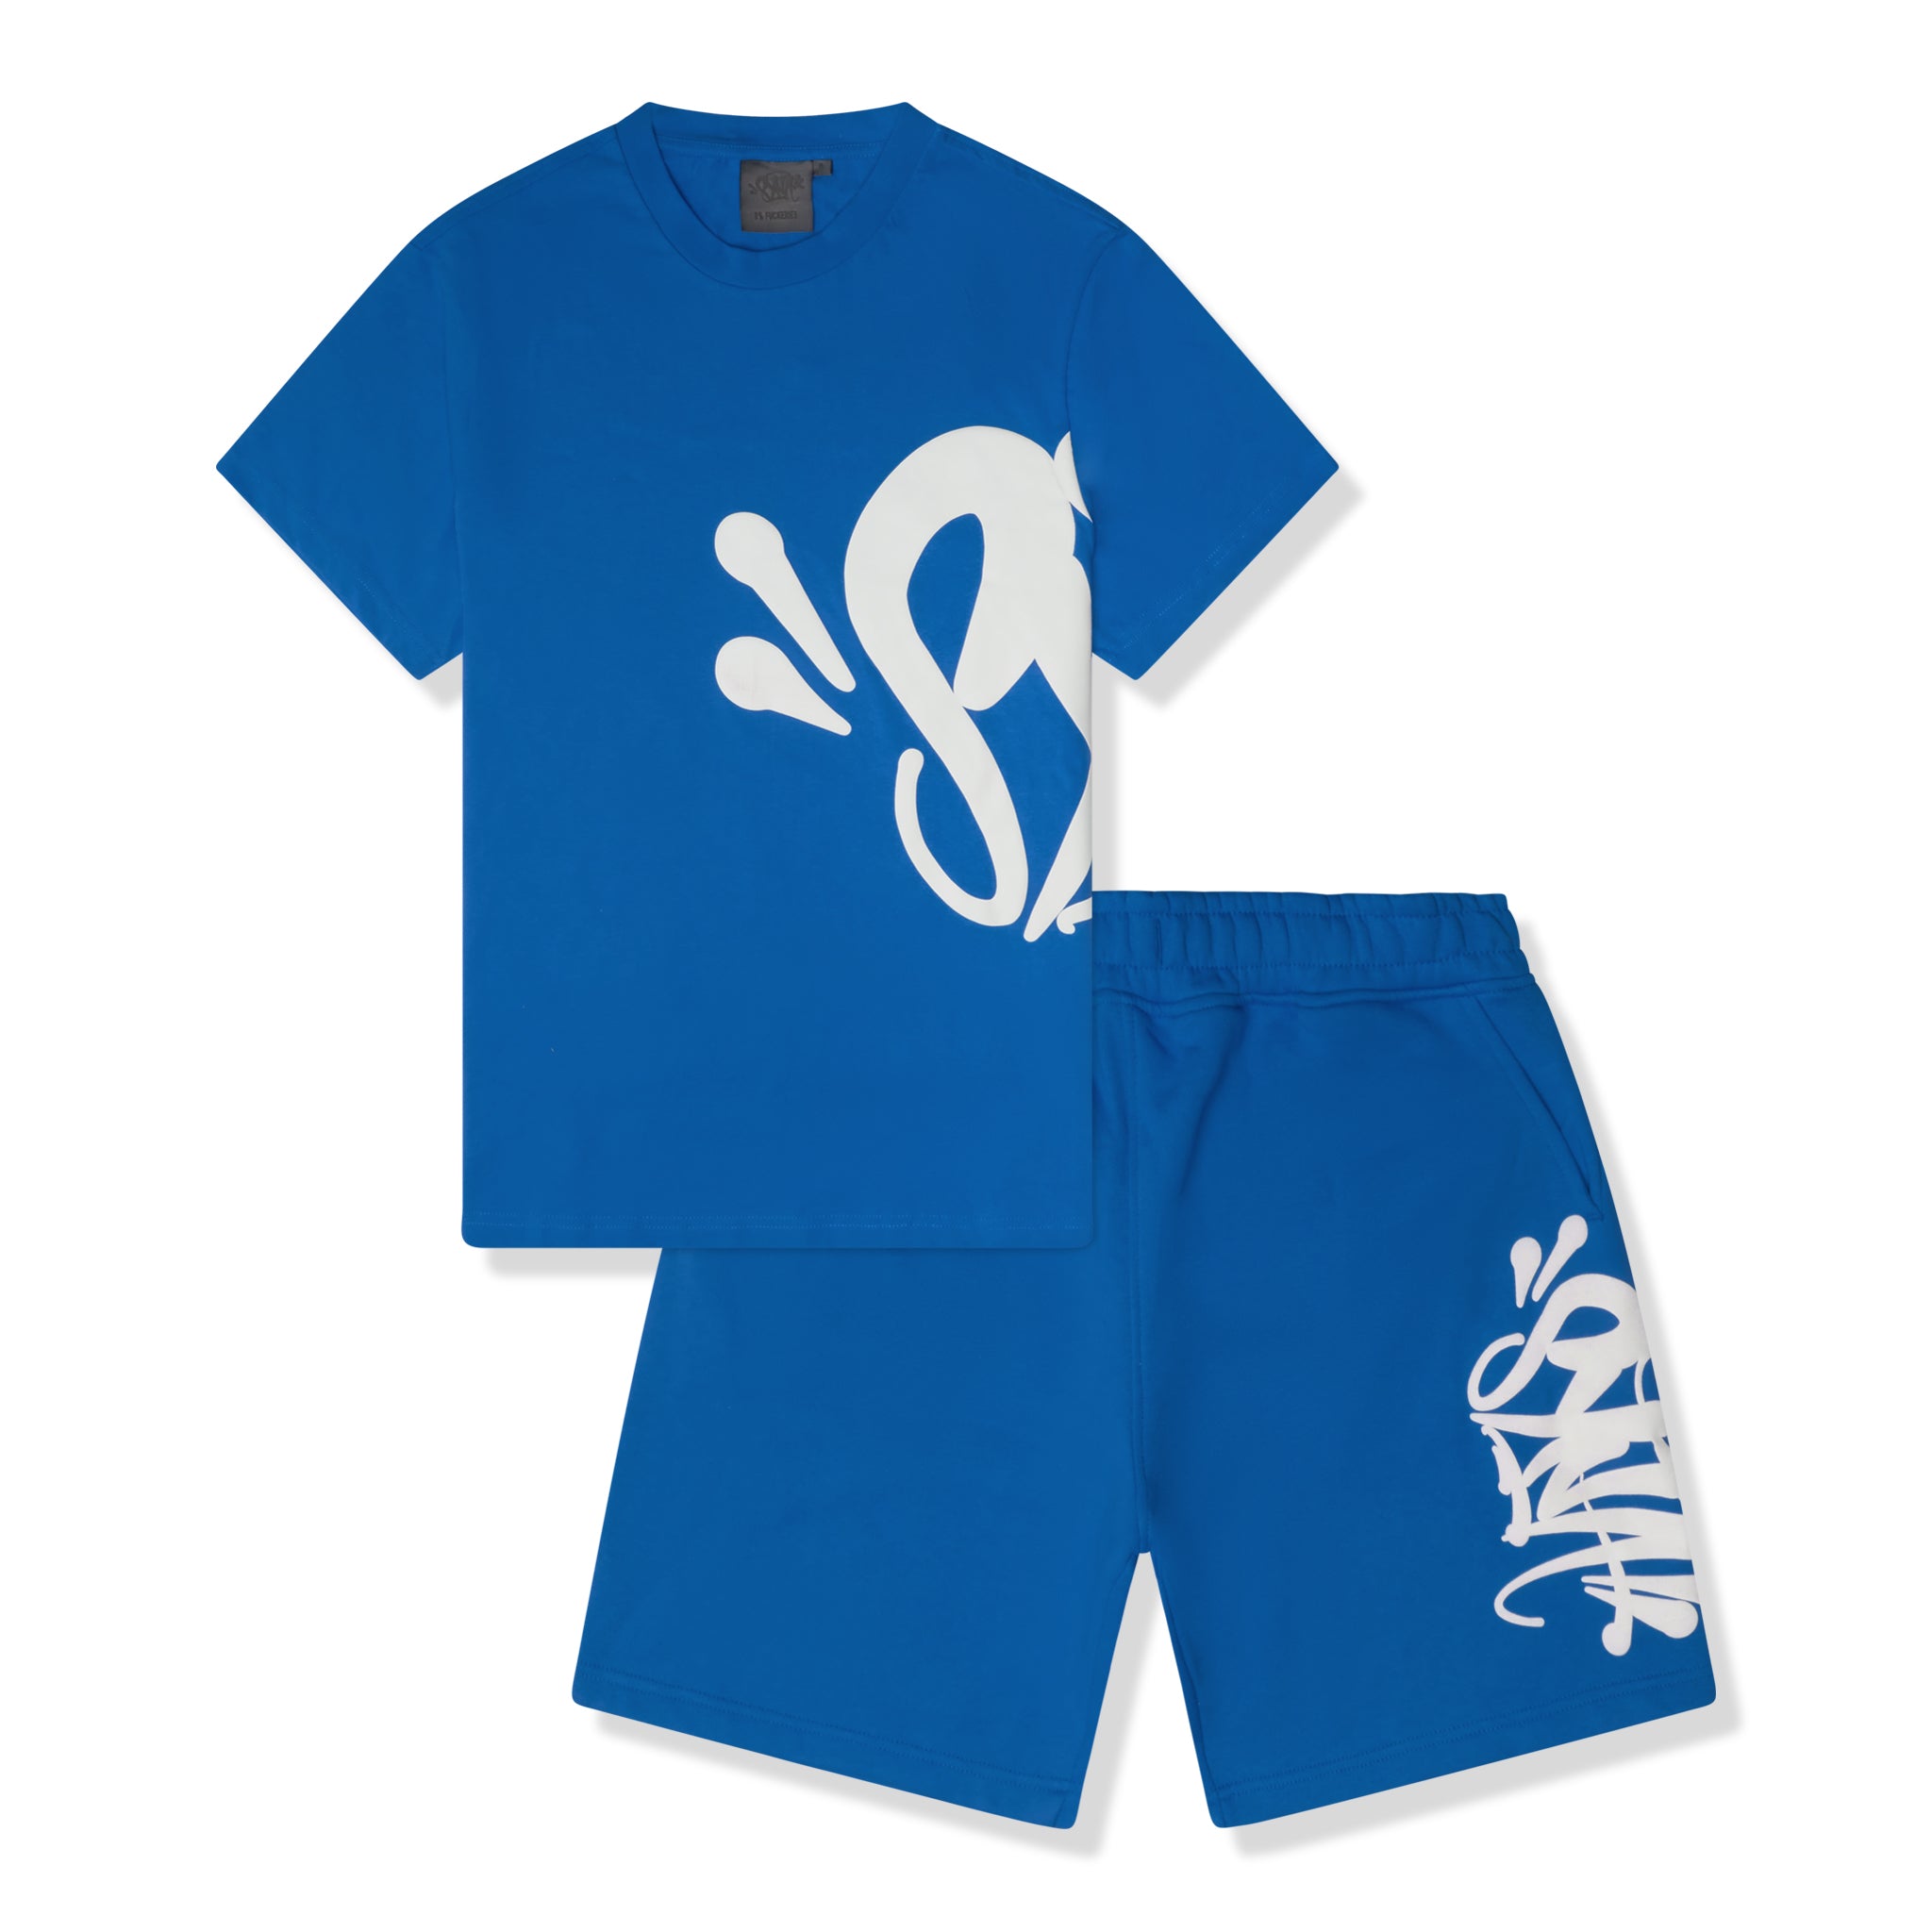 Front view of Syna World Team Syna Twinset Blue T-Shirt & Shorts TEAMSYNA-SHT-BLUE